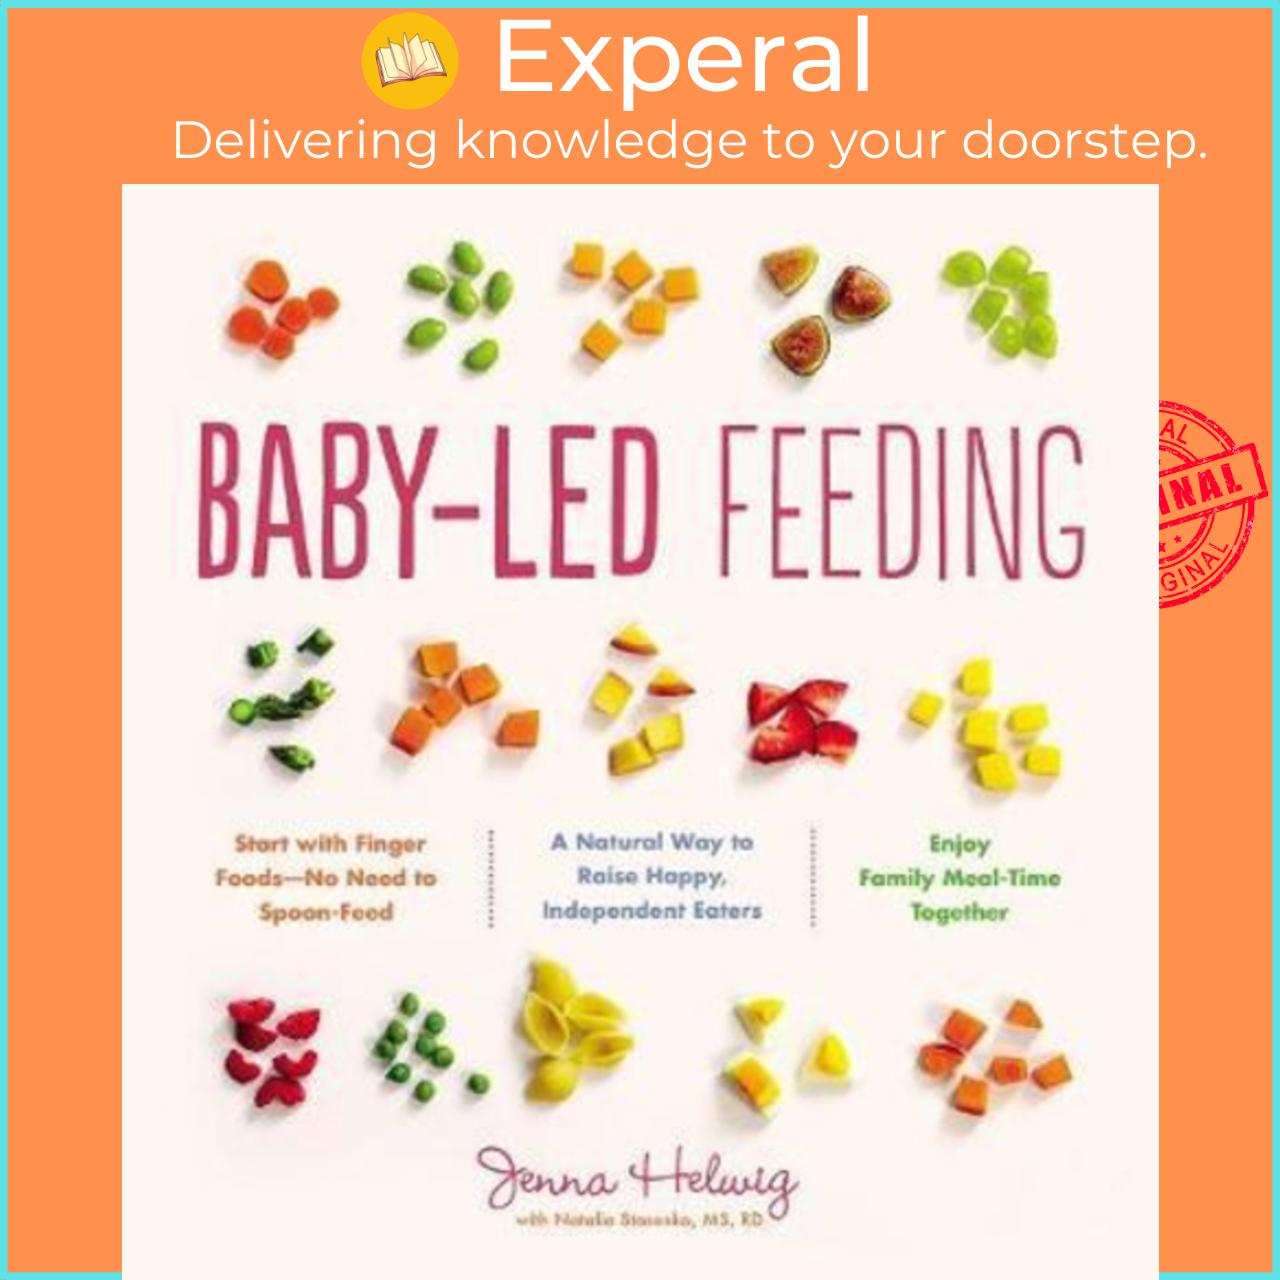 Sách - Baby-Led Feeding : A Natural Way to Raise Happy, Independent Eaters by Jenna Helwig (US edition, paperback)